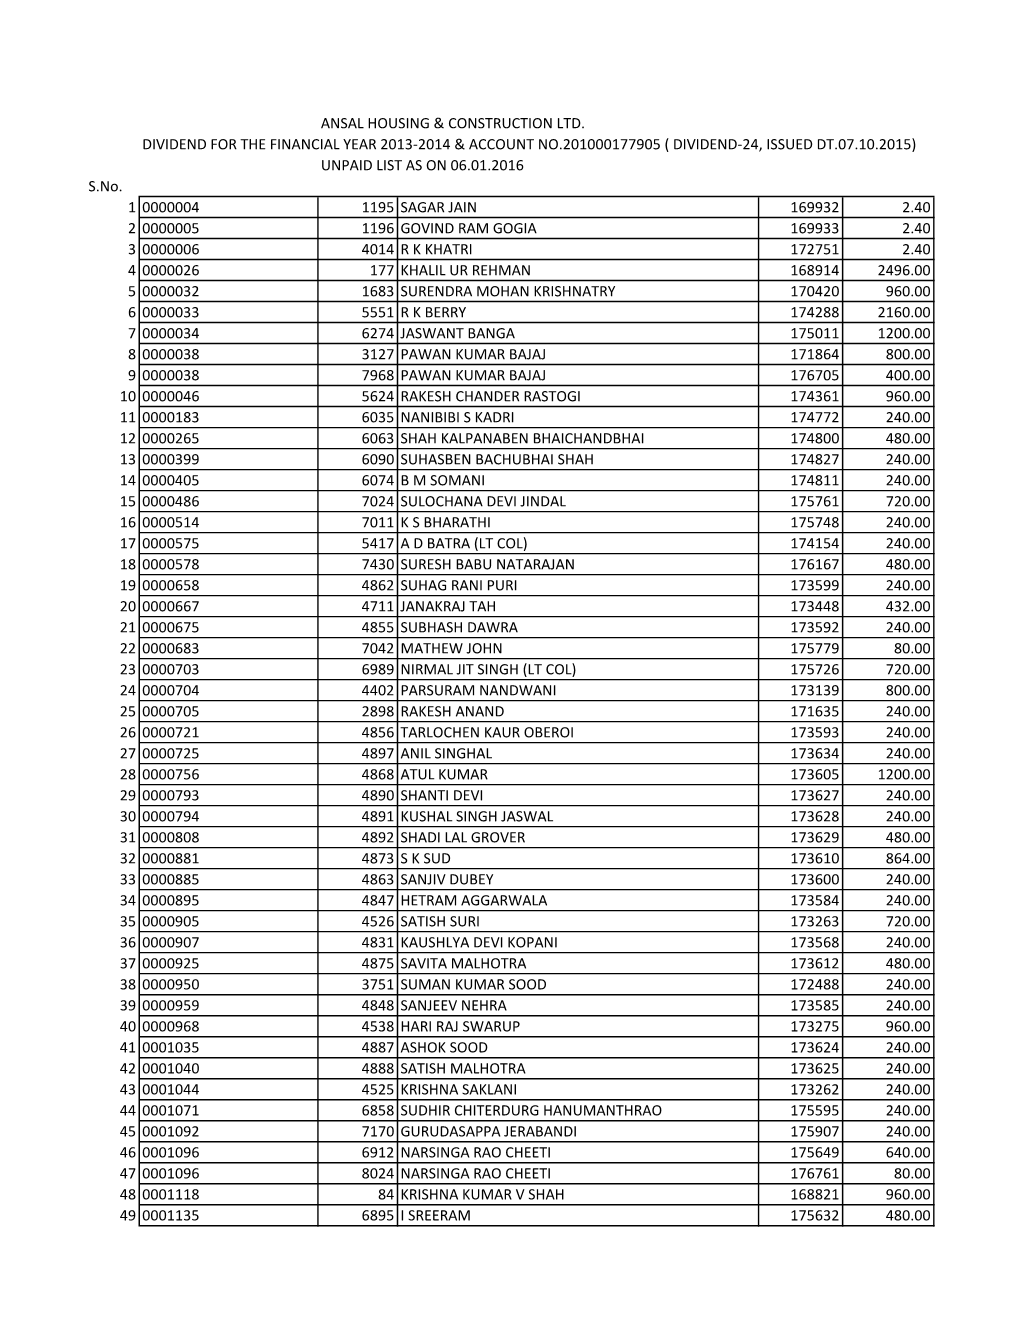 DIVIDEND-24, ISSUED DT.07.10.2015) UNPAID LIST AS on 06.01.2016 S.No